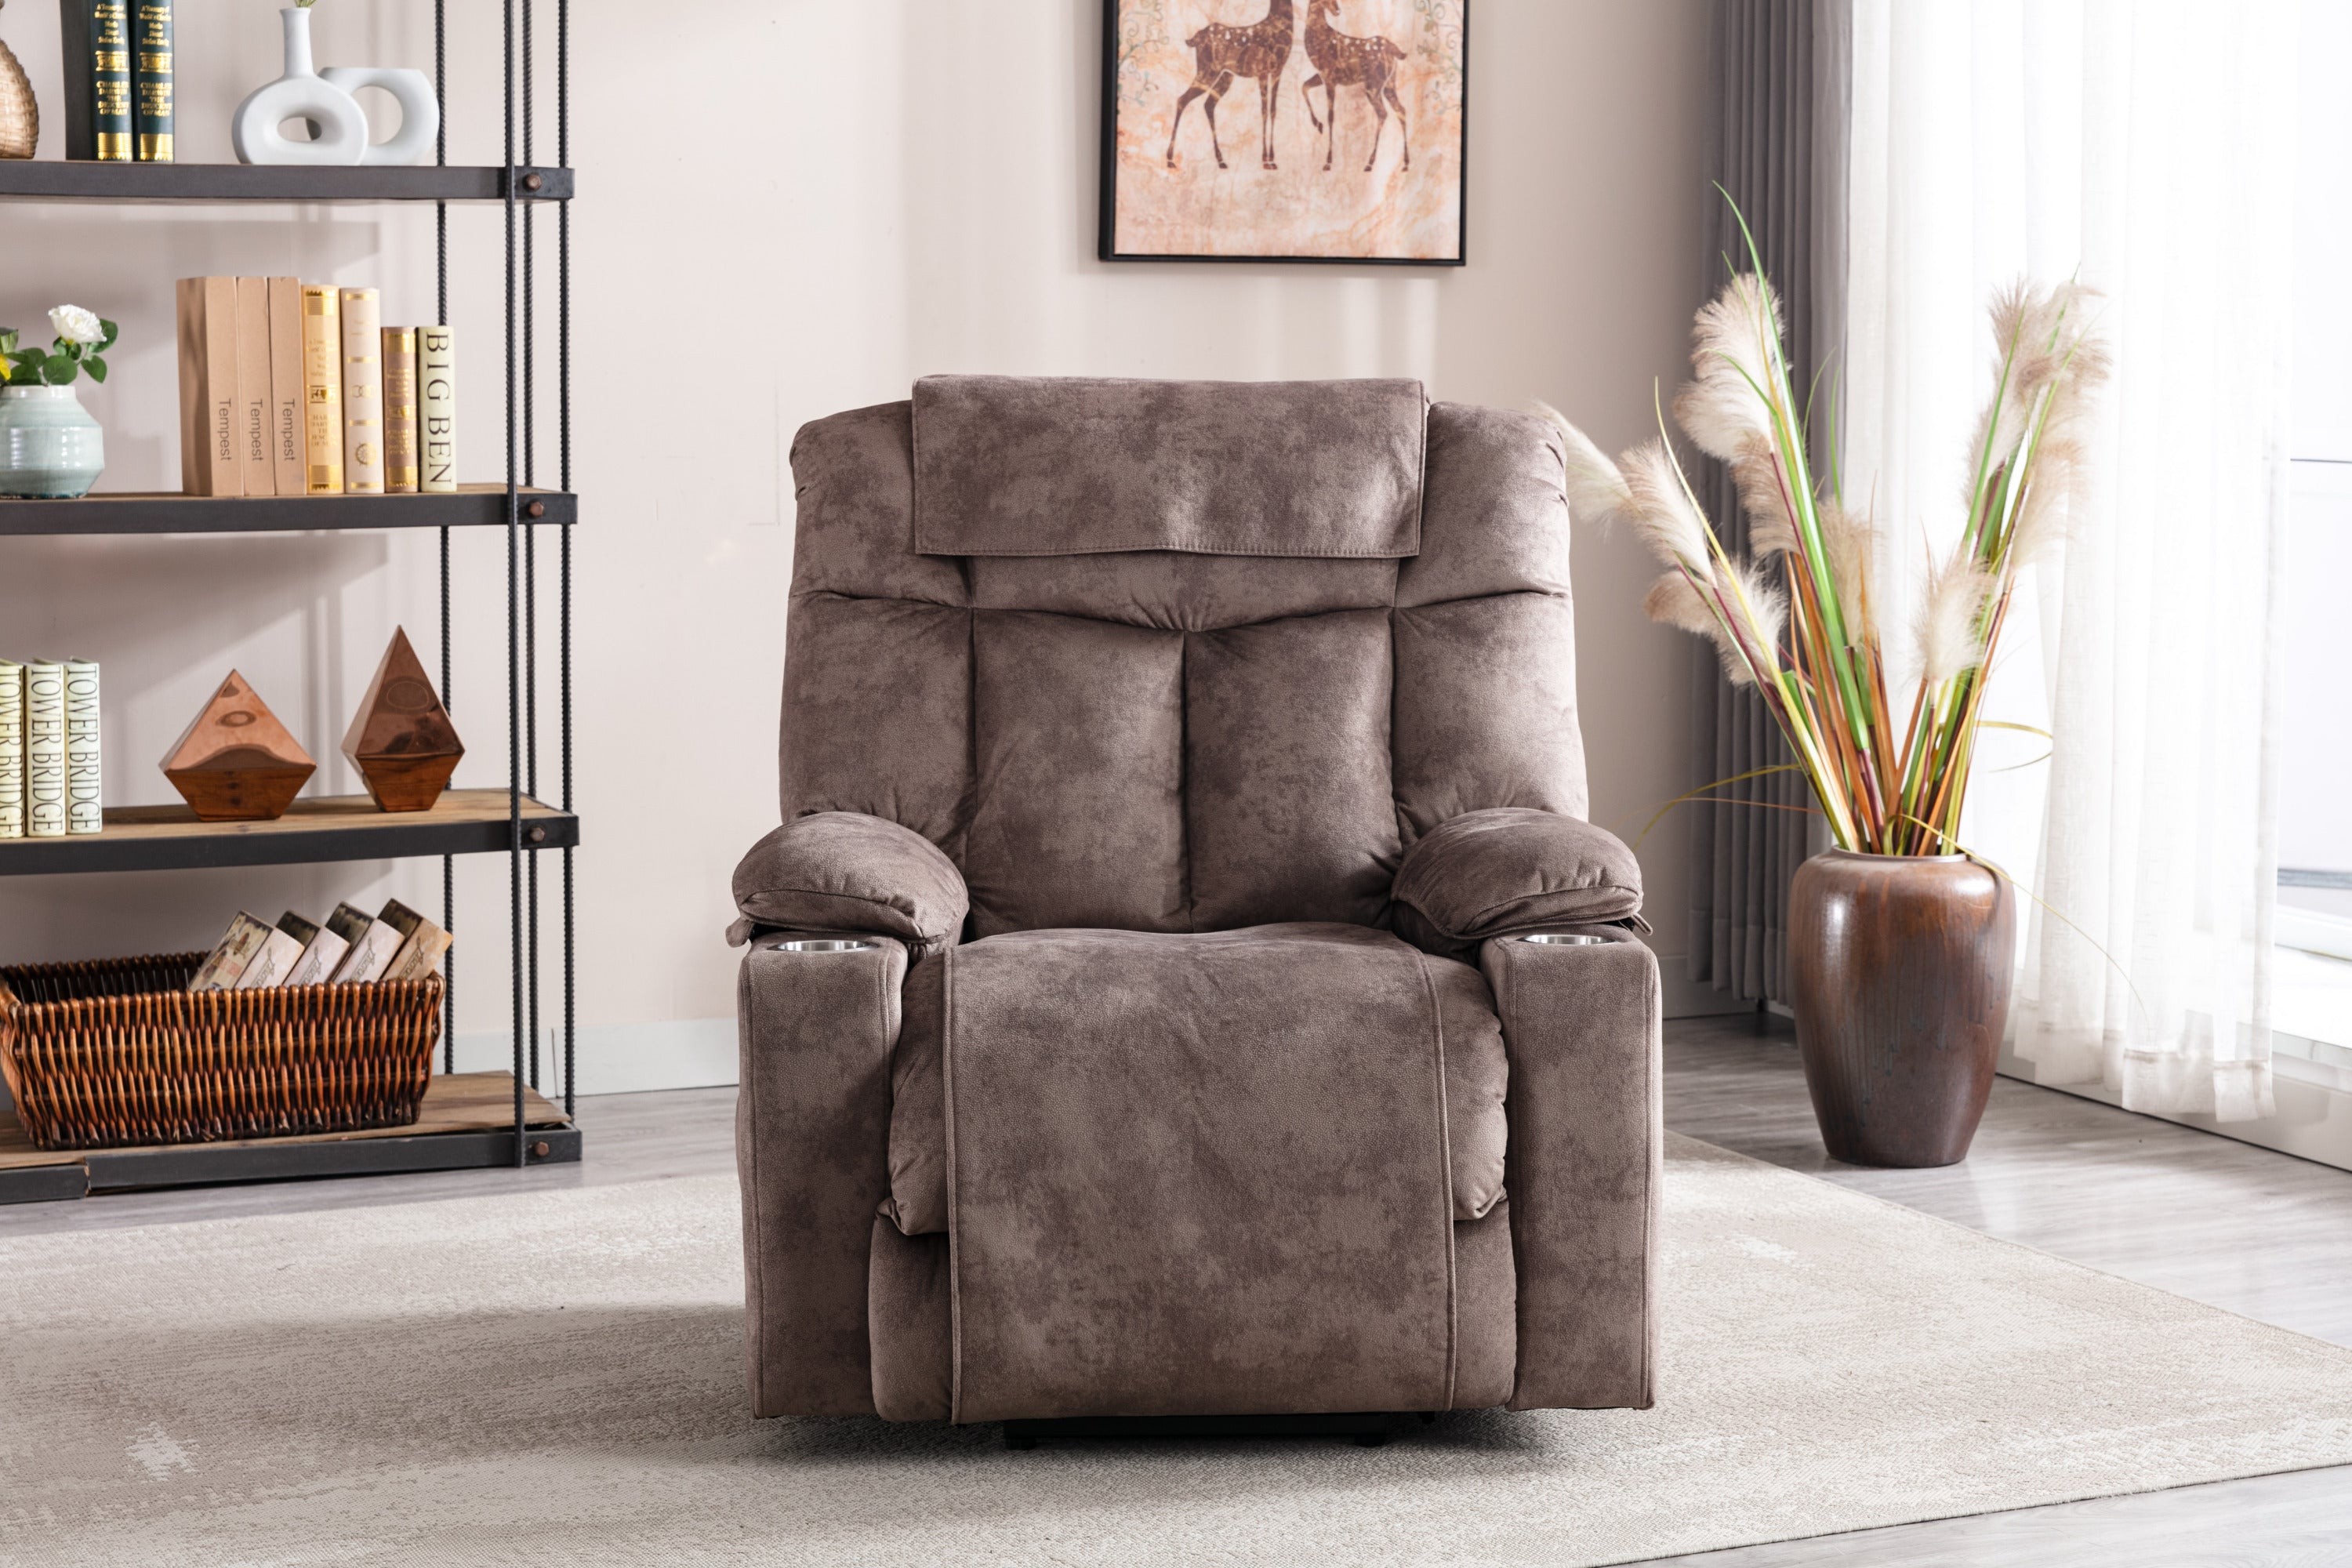 Power Lift Recliner Chair with Washable Cover, living room scene